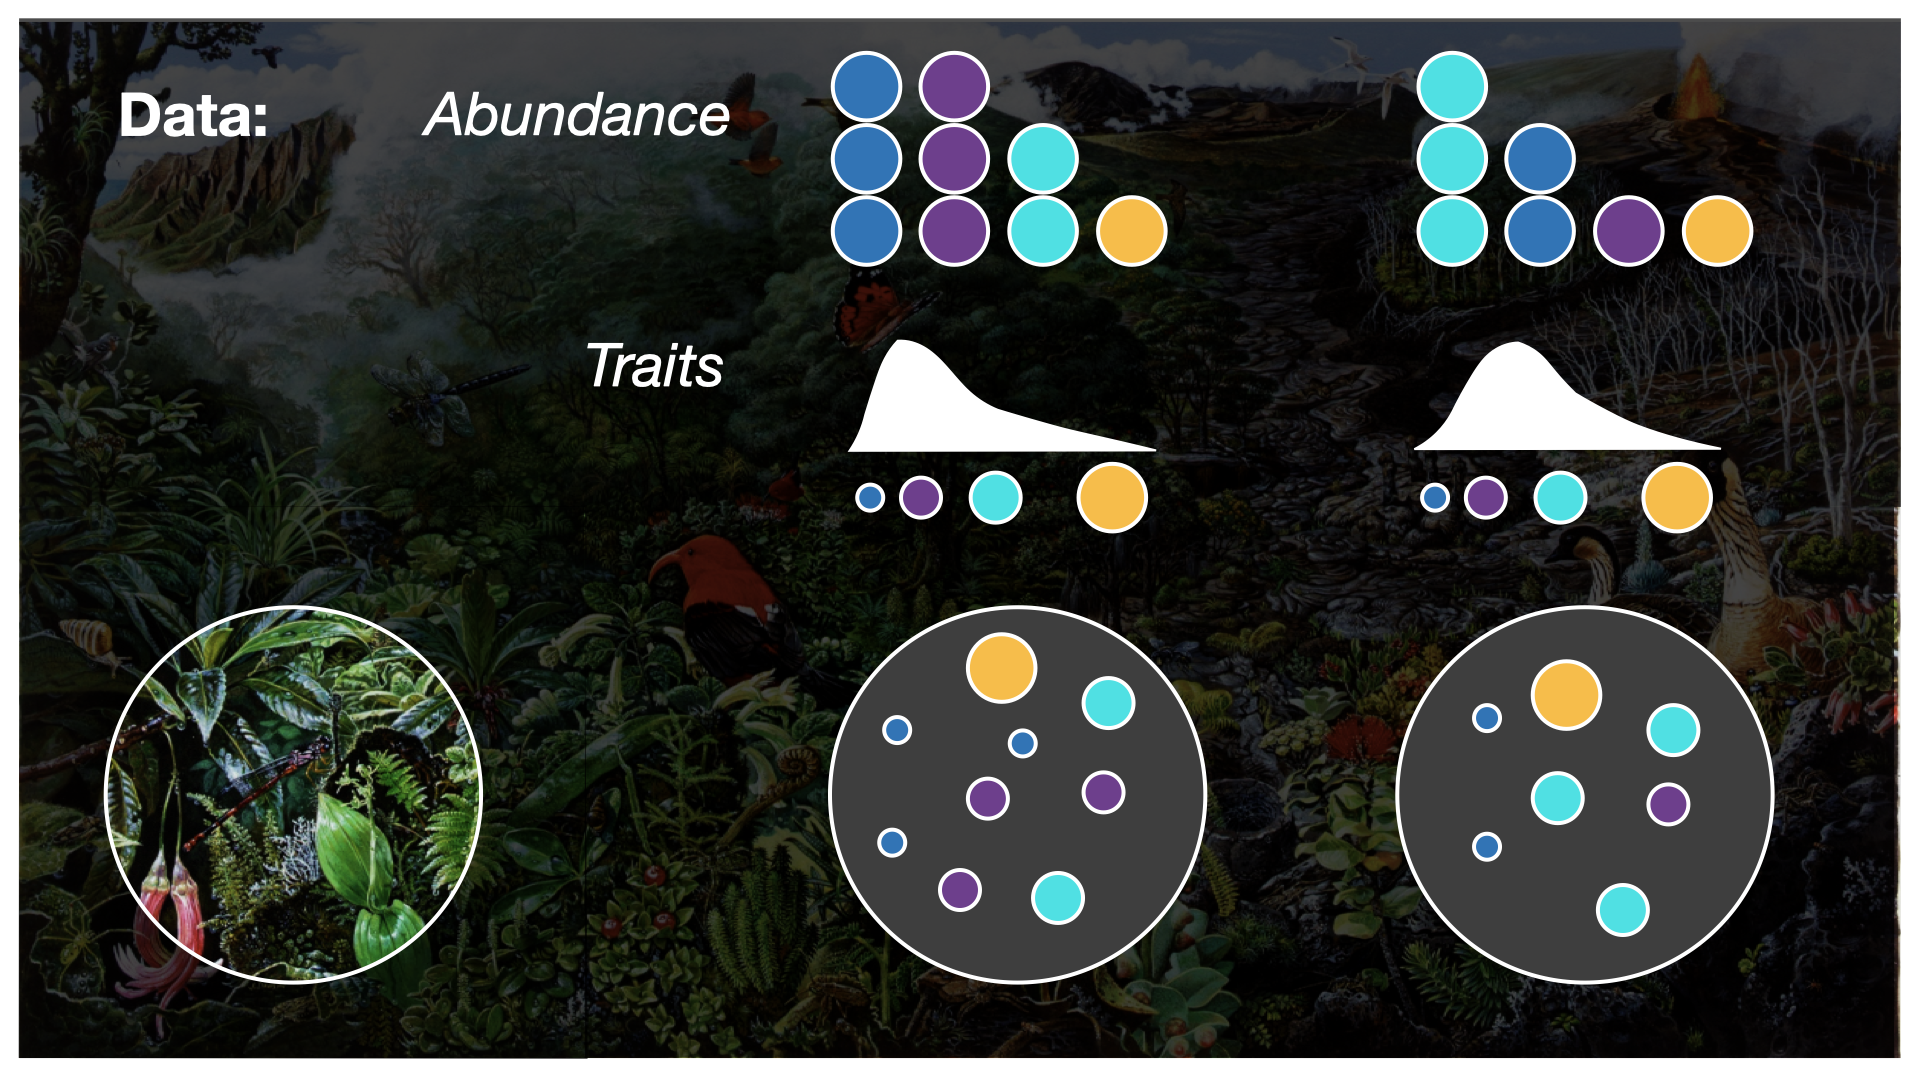 A figure showing a cartoon of organisms (shown as dots) with different colors representing different species, and different sizes of the dots representing body sizes—a common and useful trait.